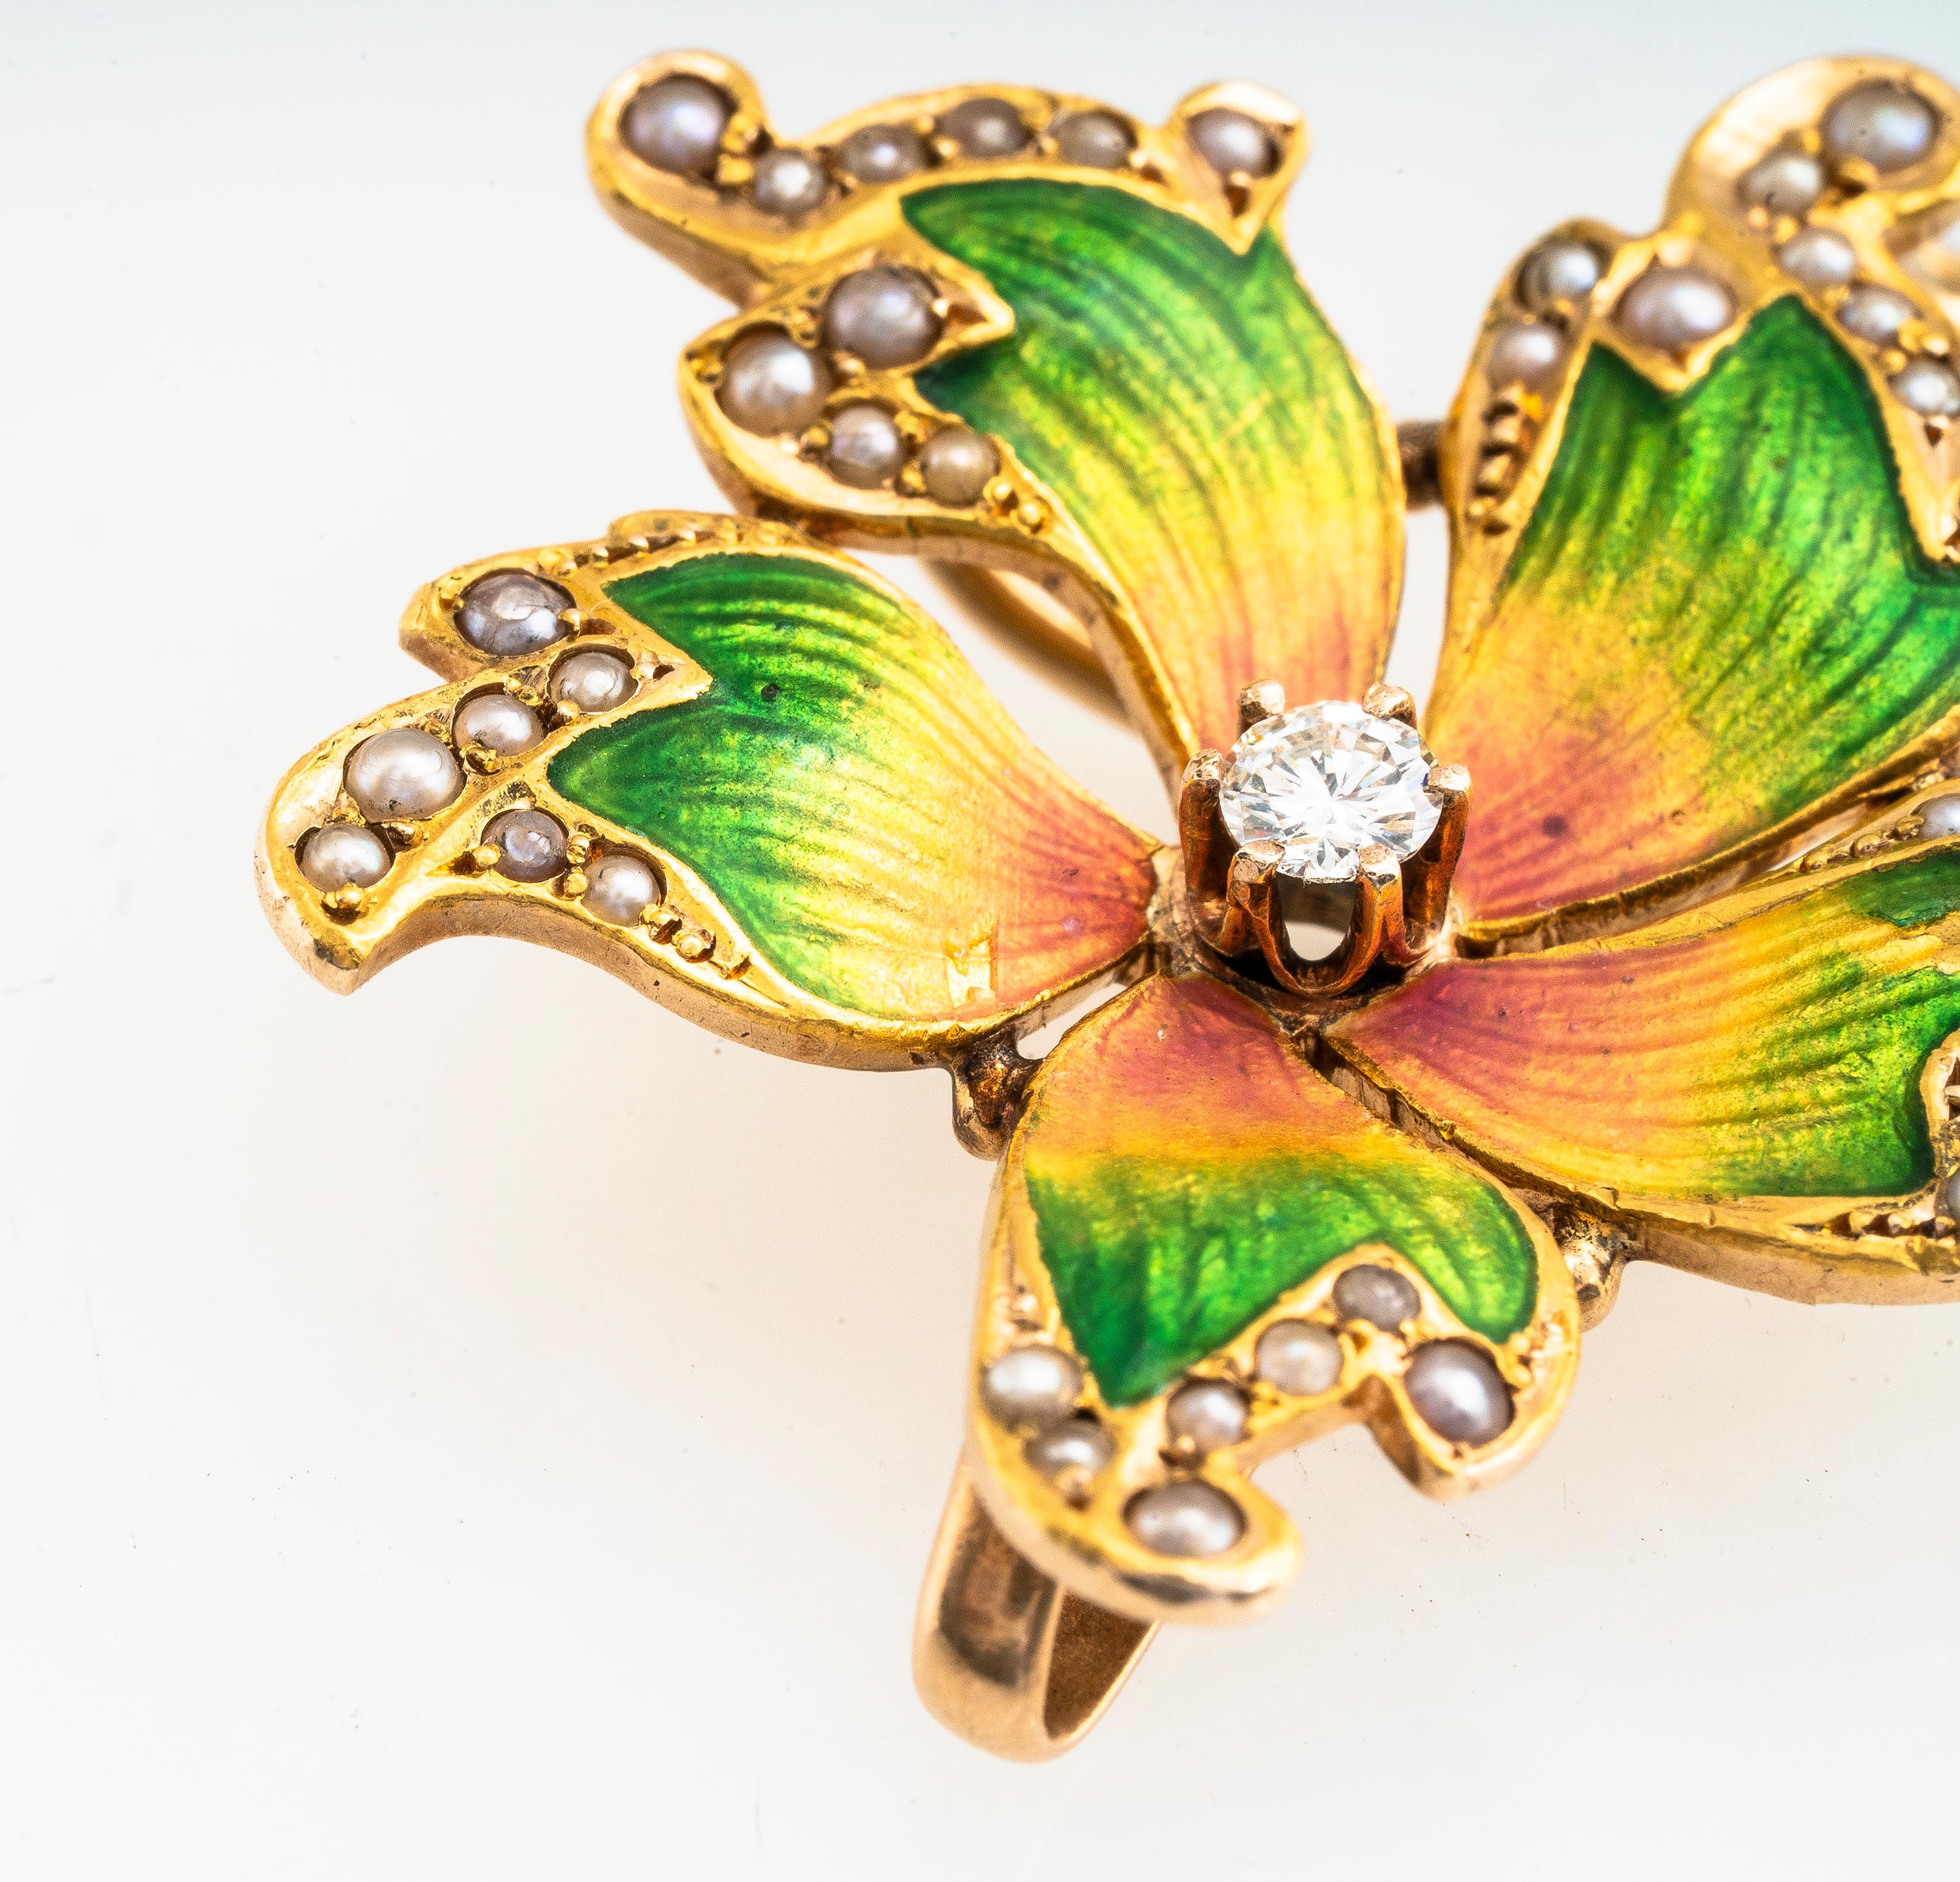 Antique Art Nouveau 14k yellow gold diamond and seed pearl enamel flower pendant/brooch.  Approximately 0.10 carat old European cut diamond J color and I1 clarity.   Enamel color transitions from green to yellow and then pink.   Can we worn as a